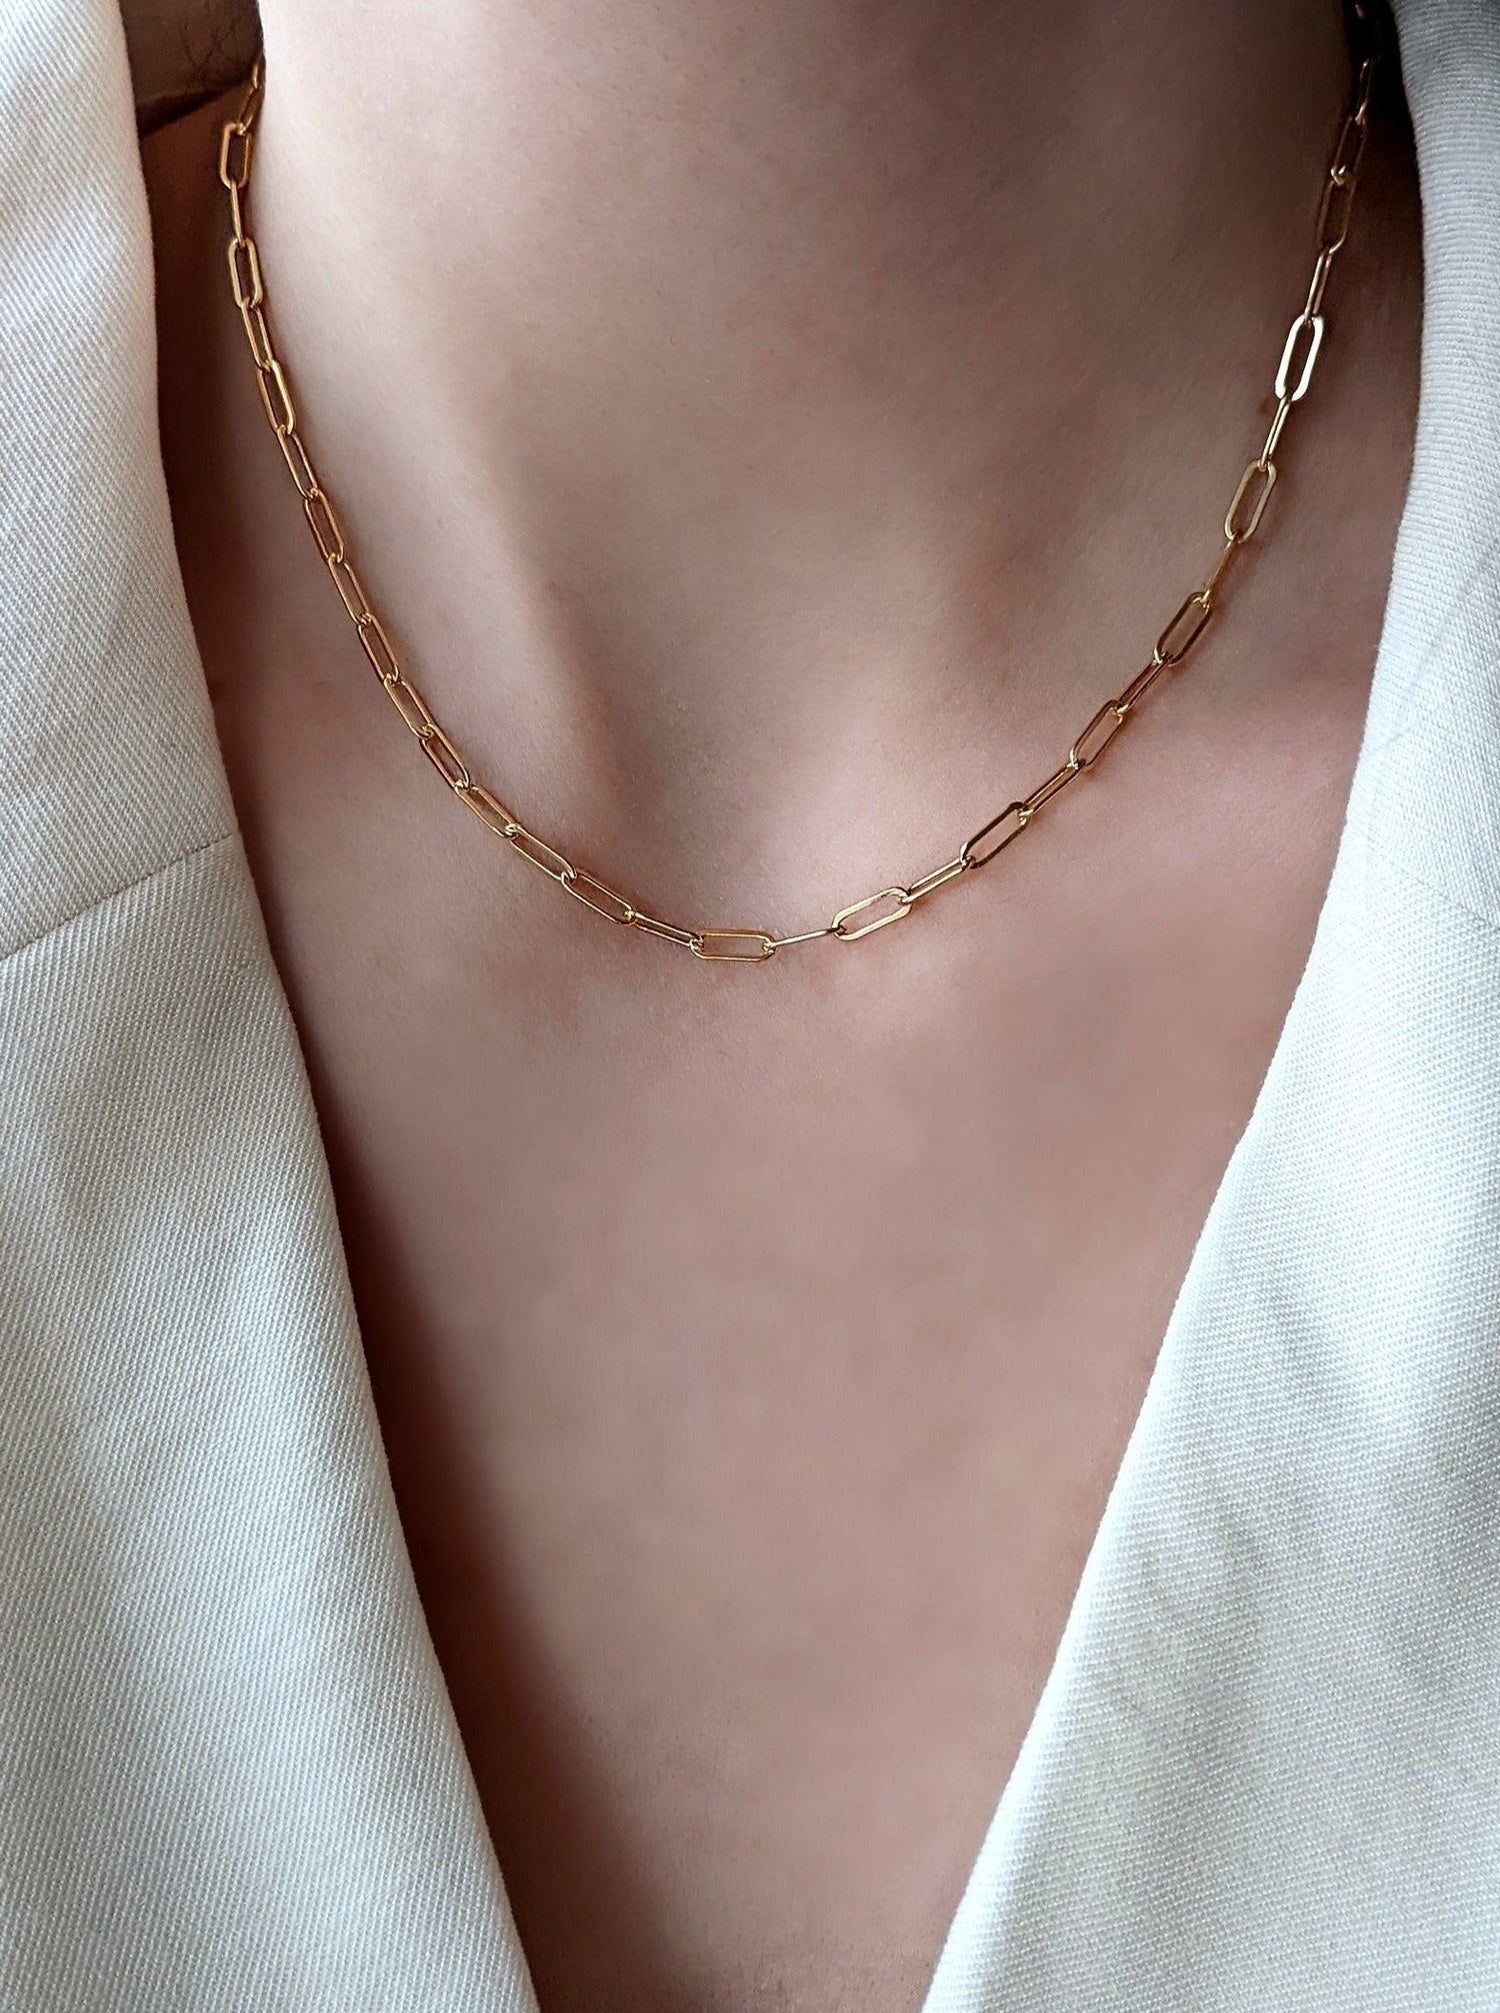 Elongated Paperclip Chain Necklace Layer the Love